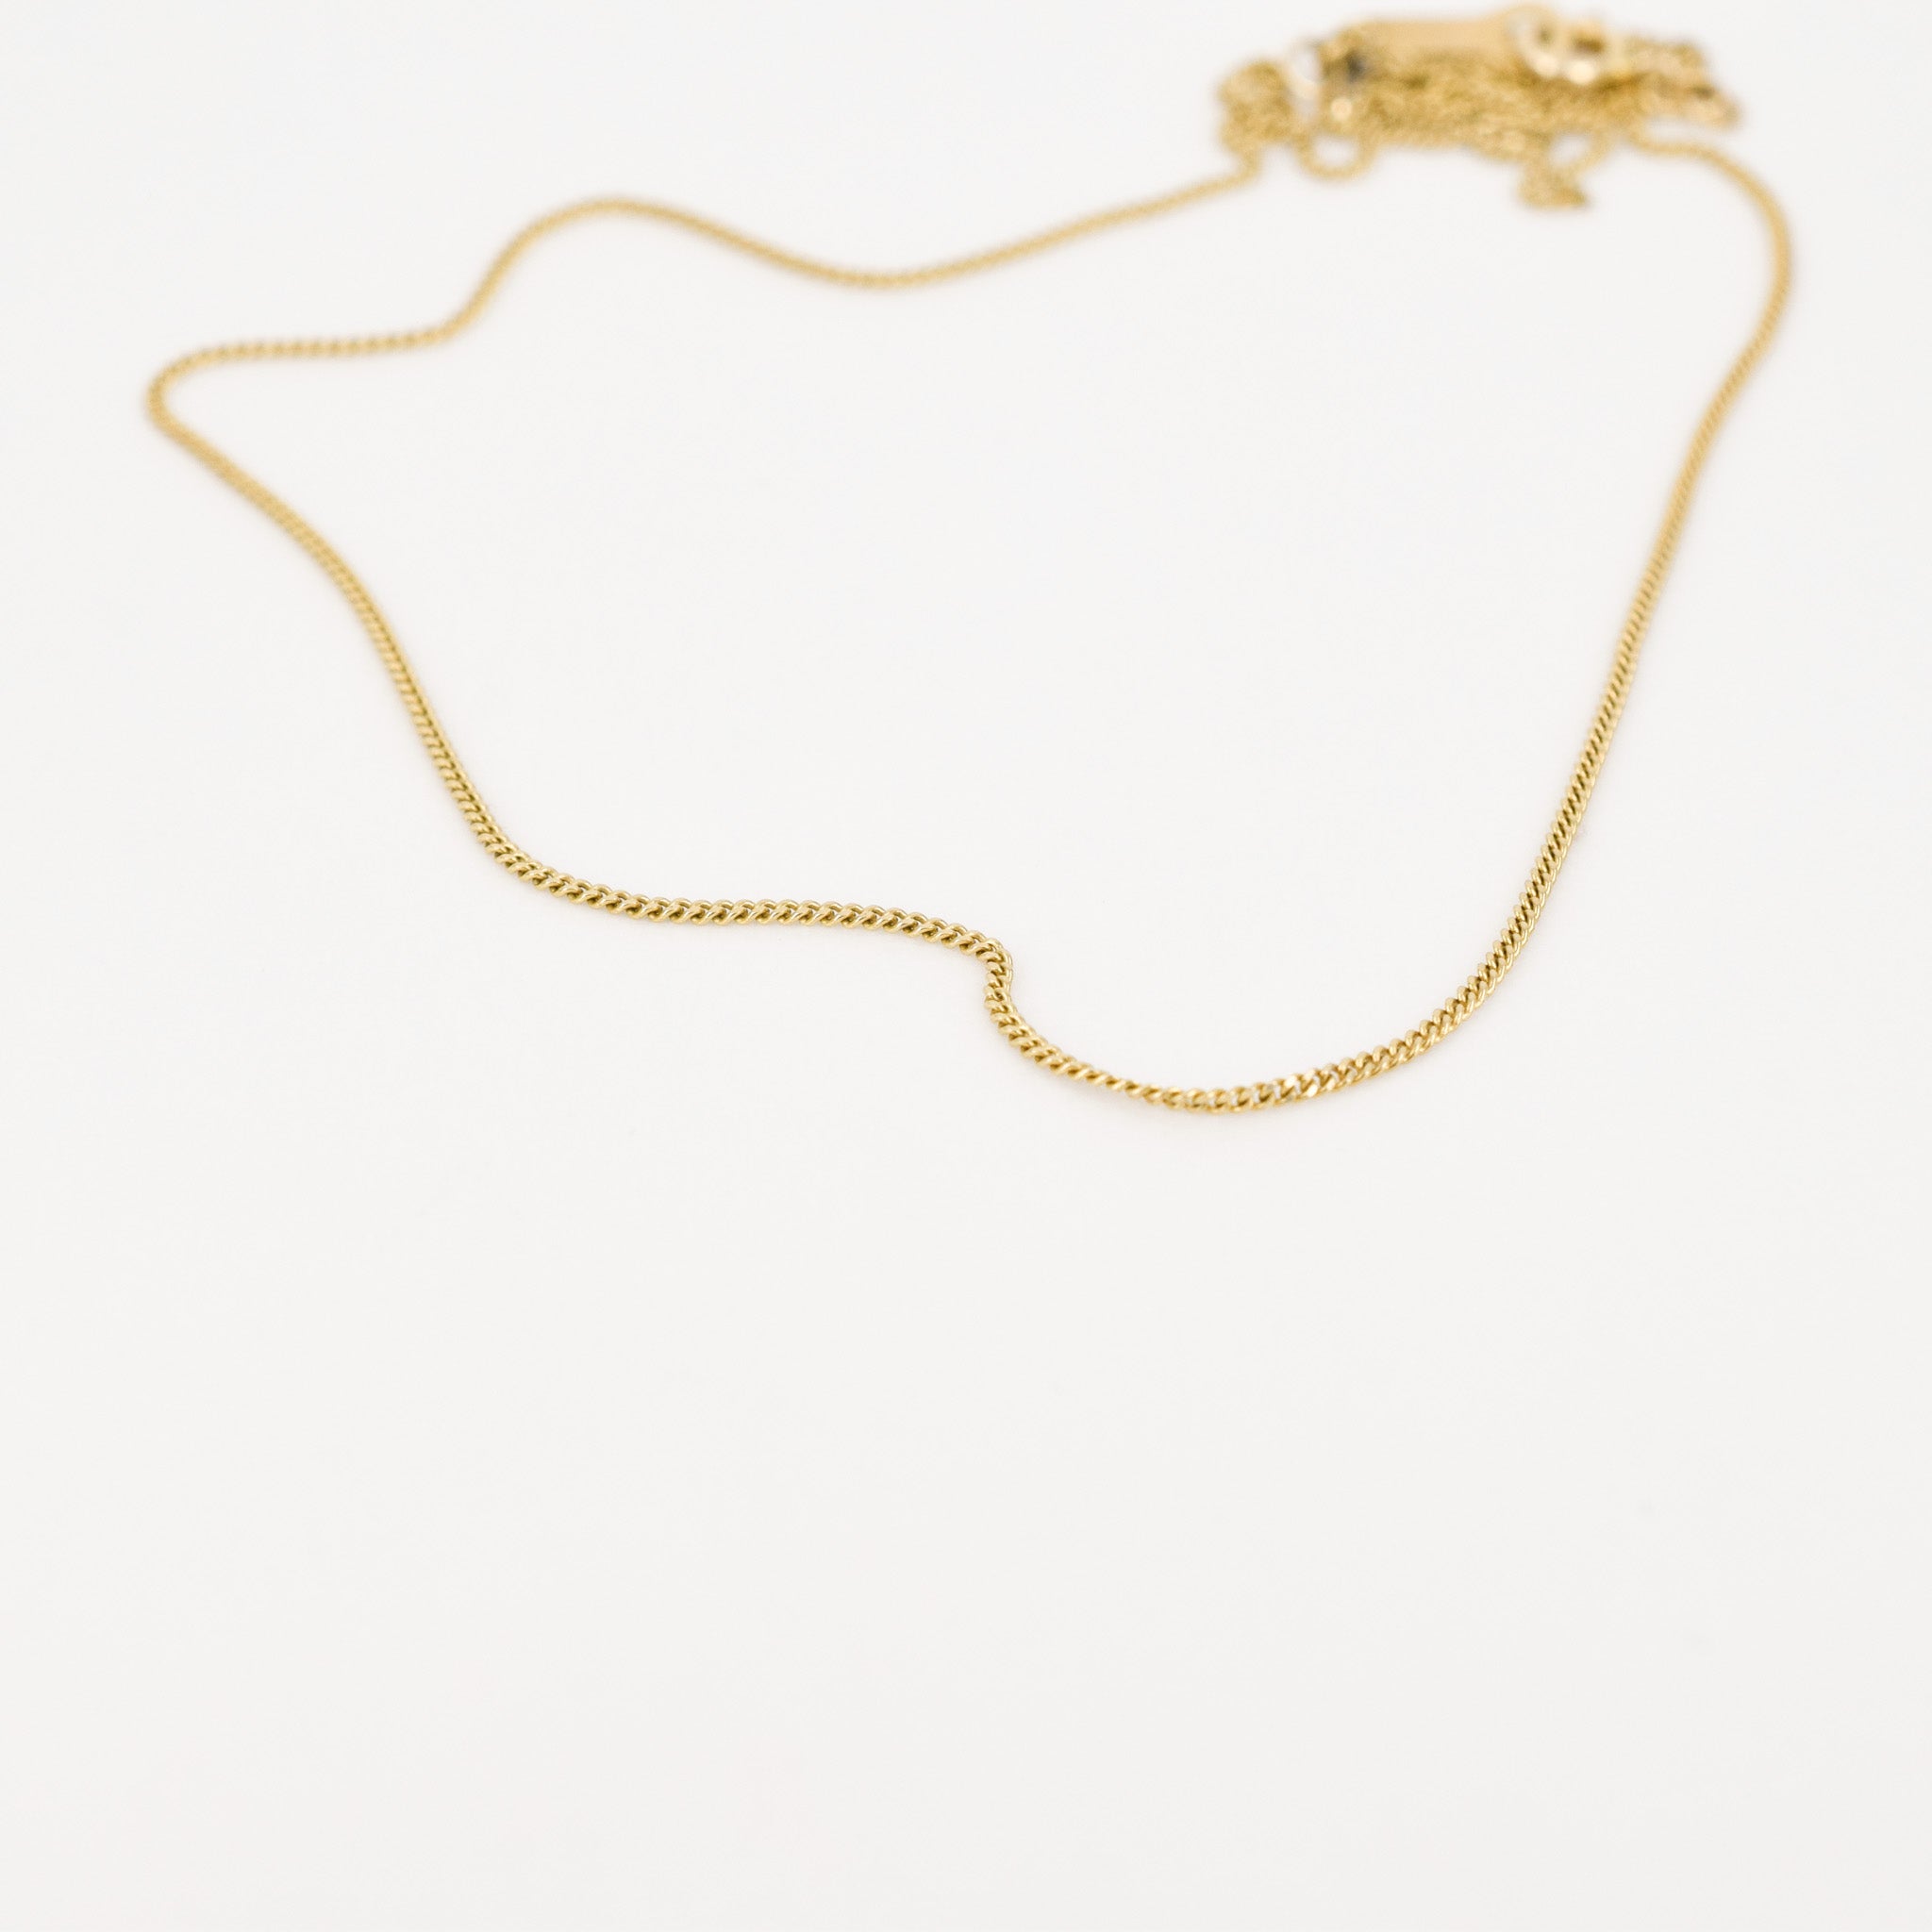 20" Dainty Curb Chain Necklace (14k)